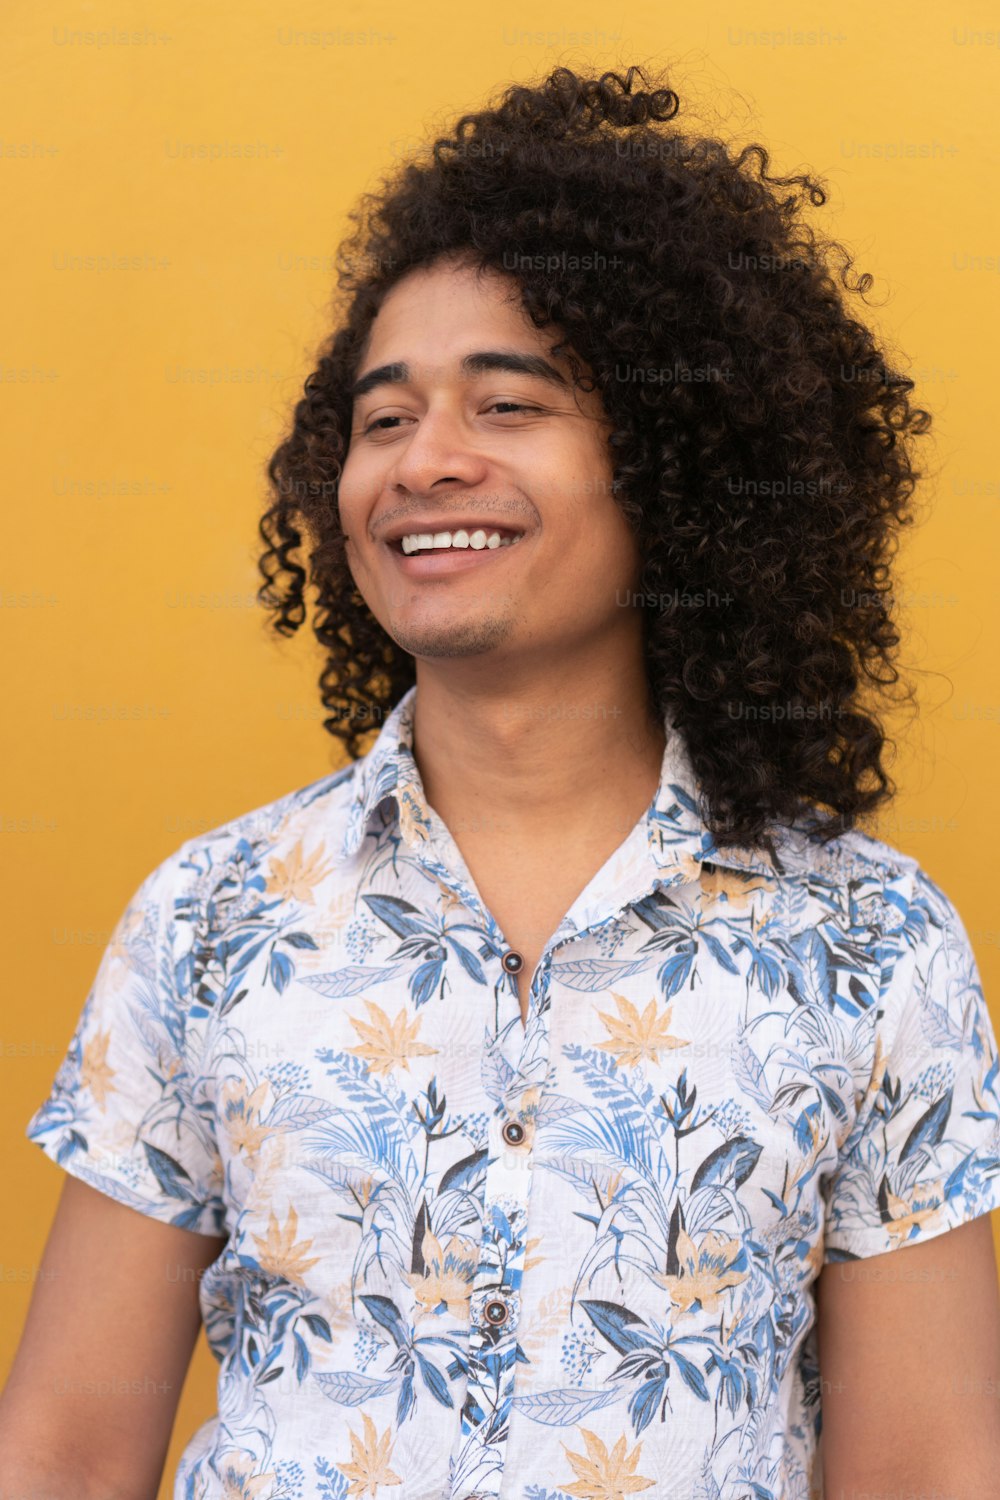 Portrait of man with curly hair